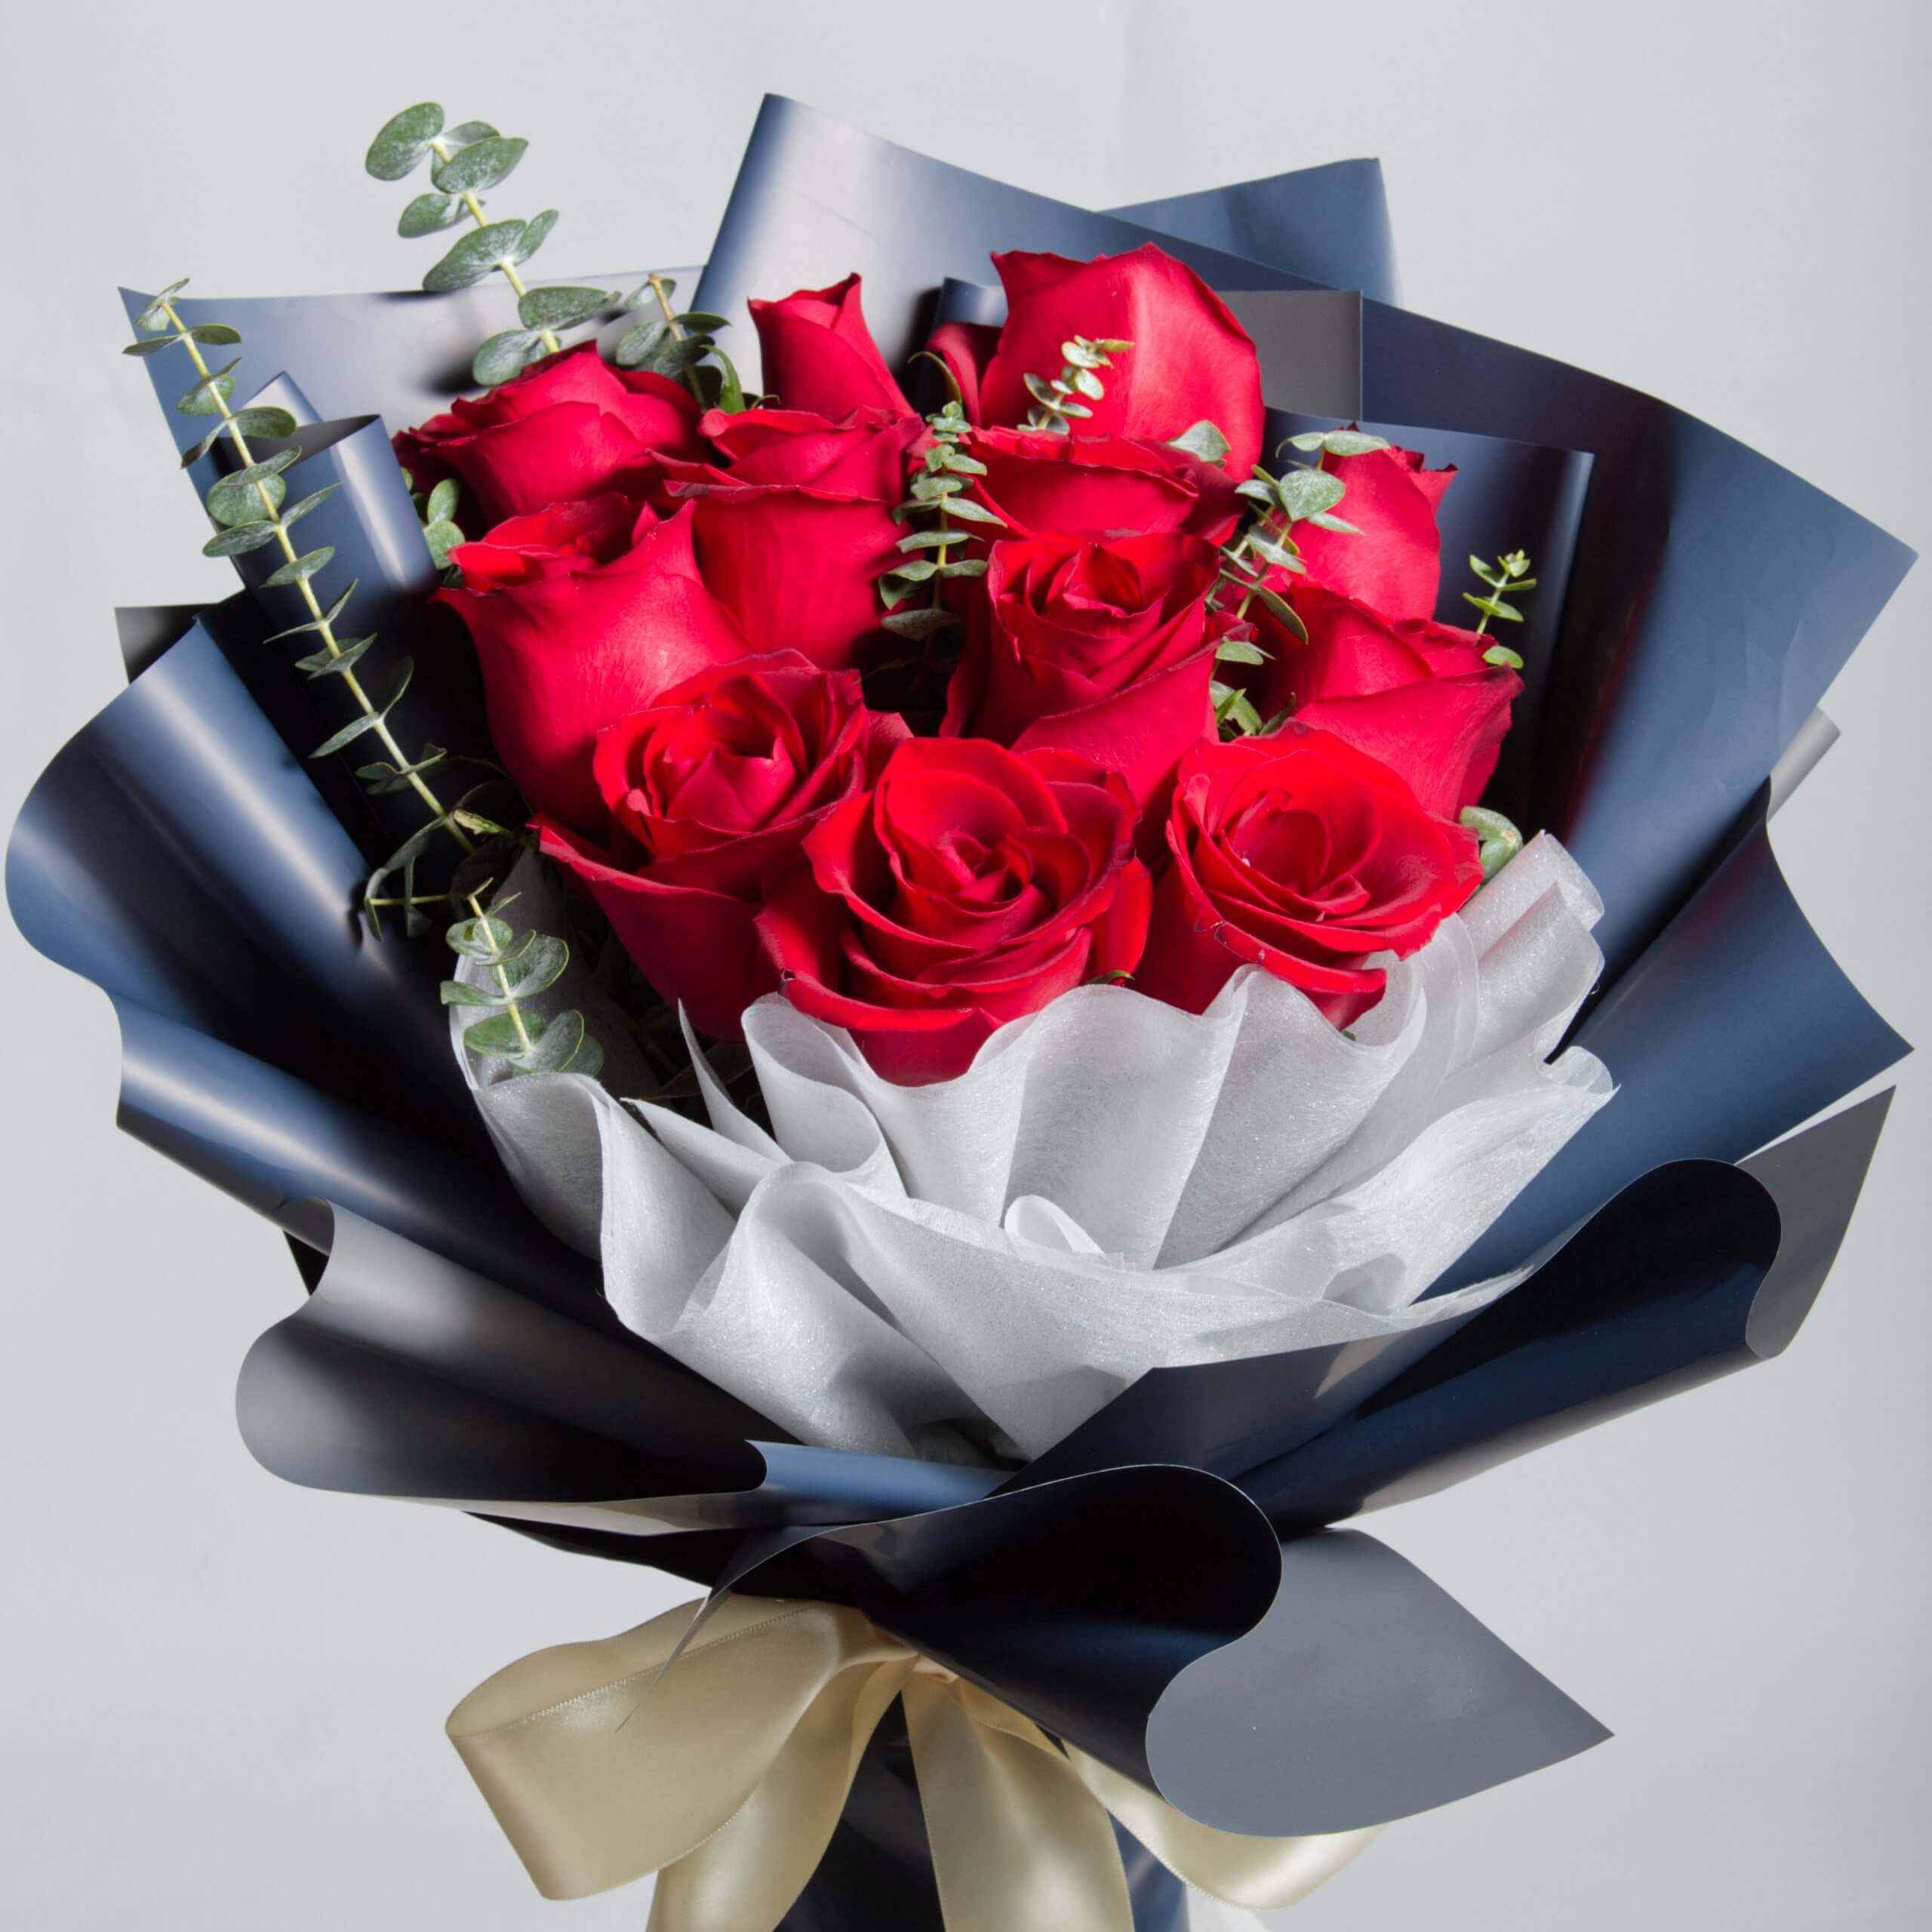 Classic Romance: Gifting Red Rose Bouquets